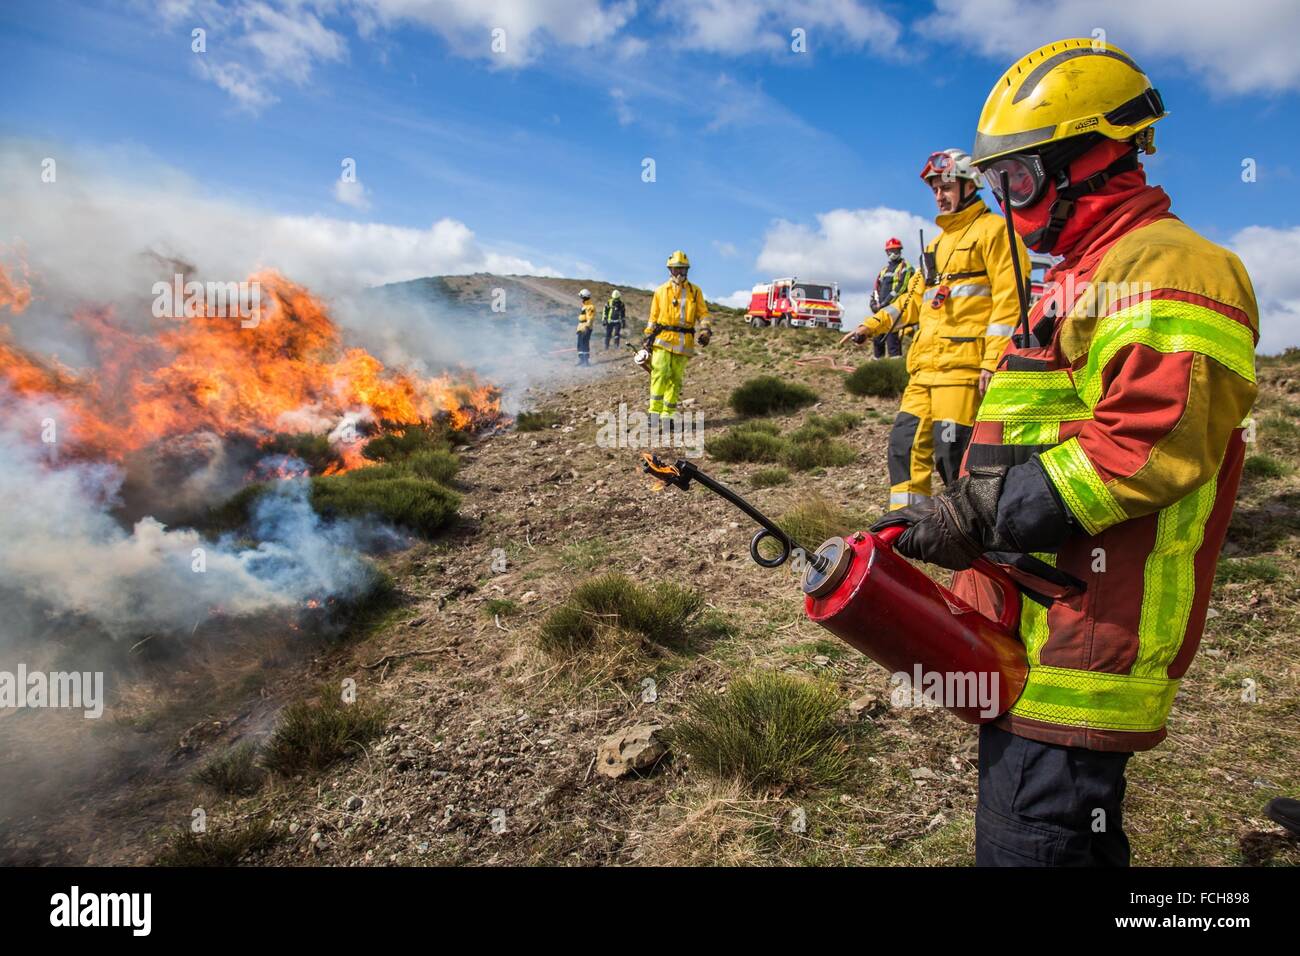 TACTICAL FIRE, FIREFIGHTERS Stock Photo